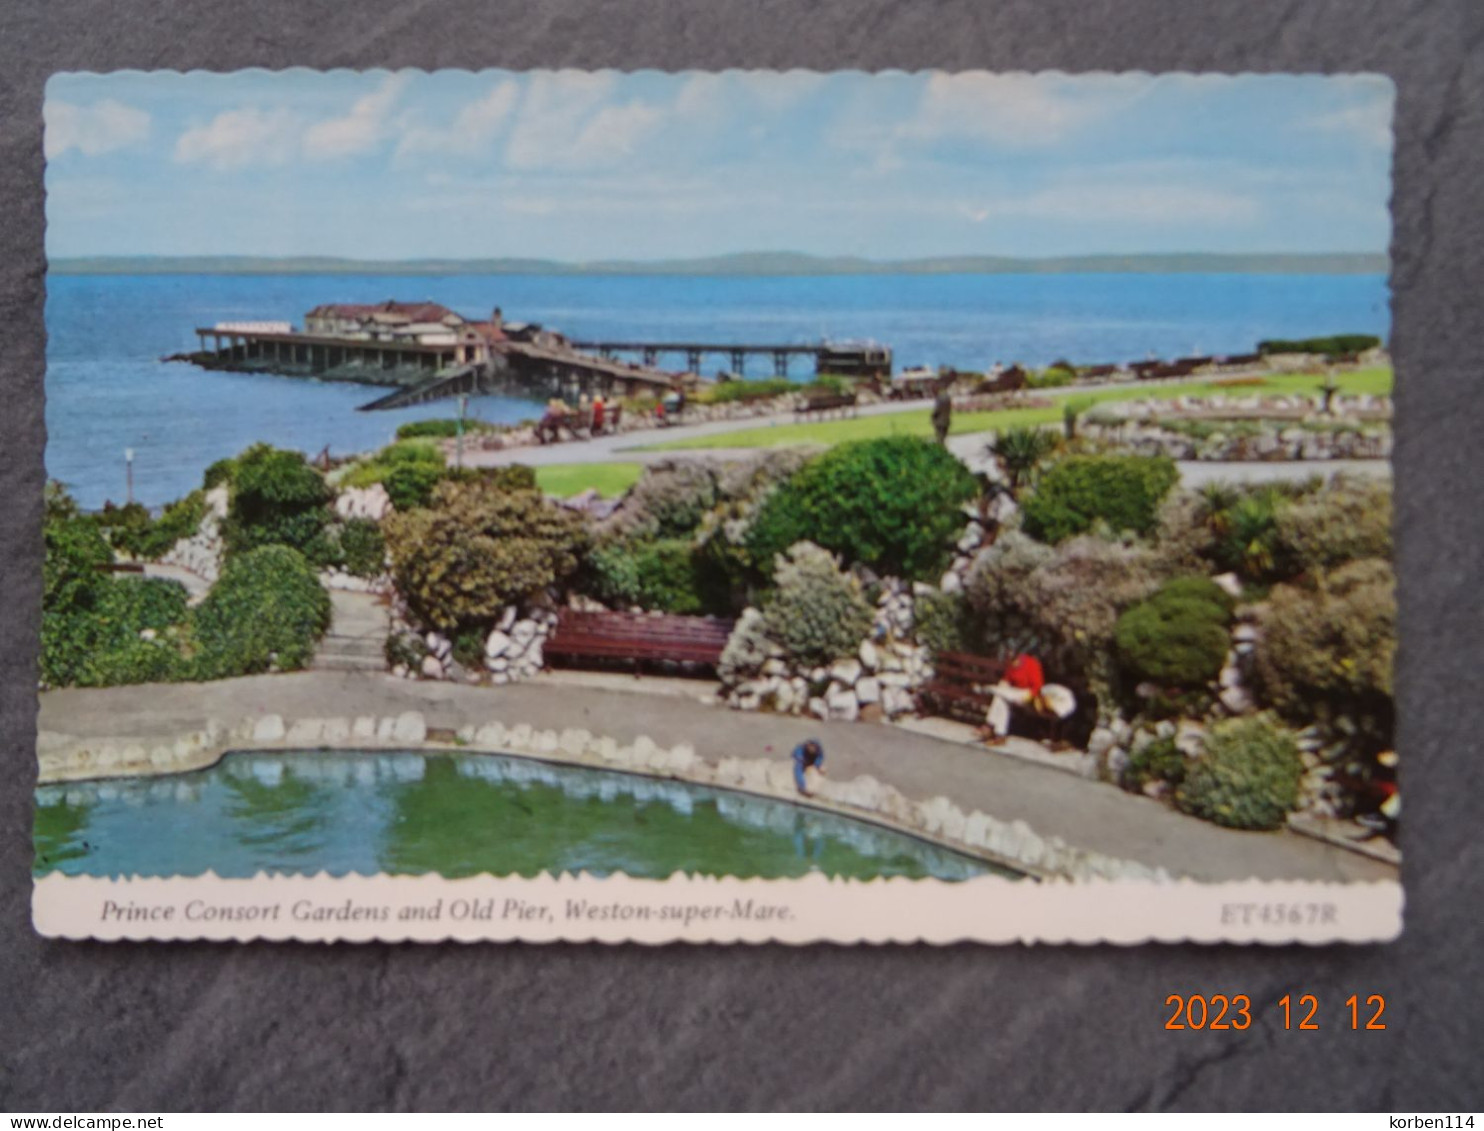 PRINCE CONSORT GARDENS AND OLD PIER - Weston-Super-Mare